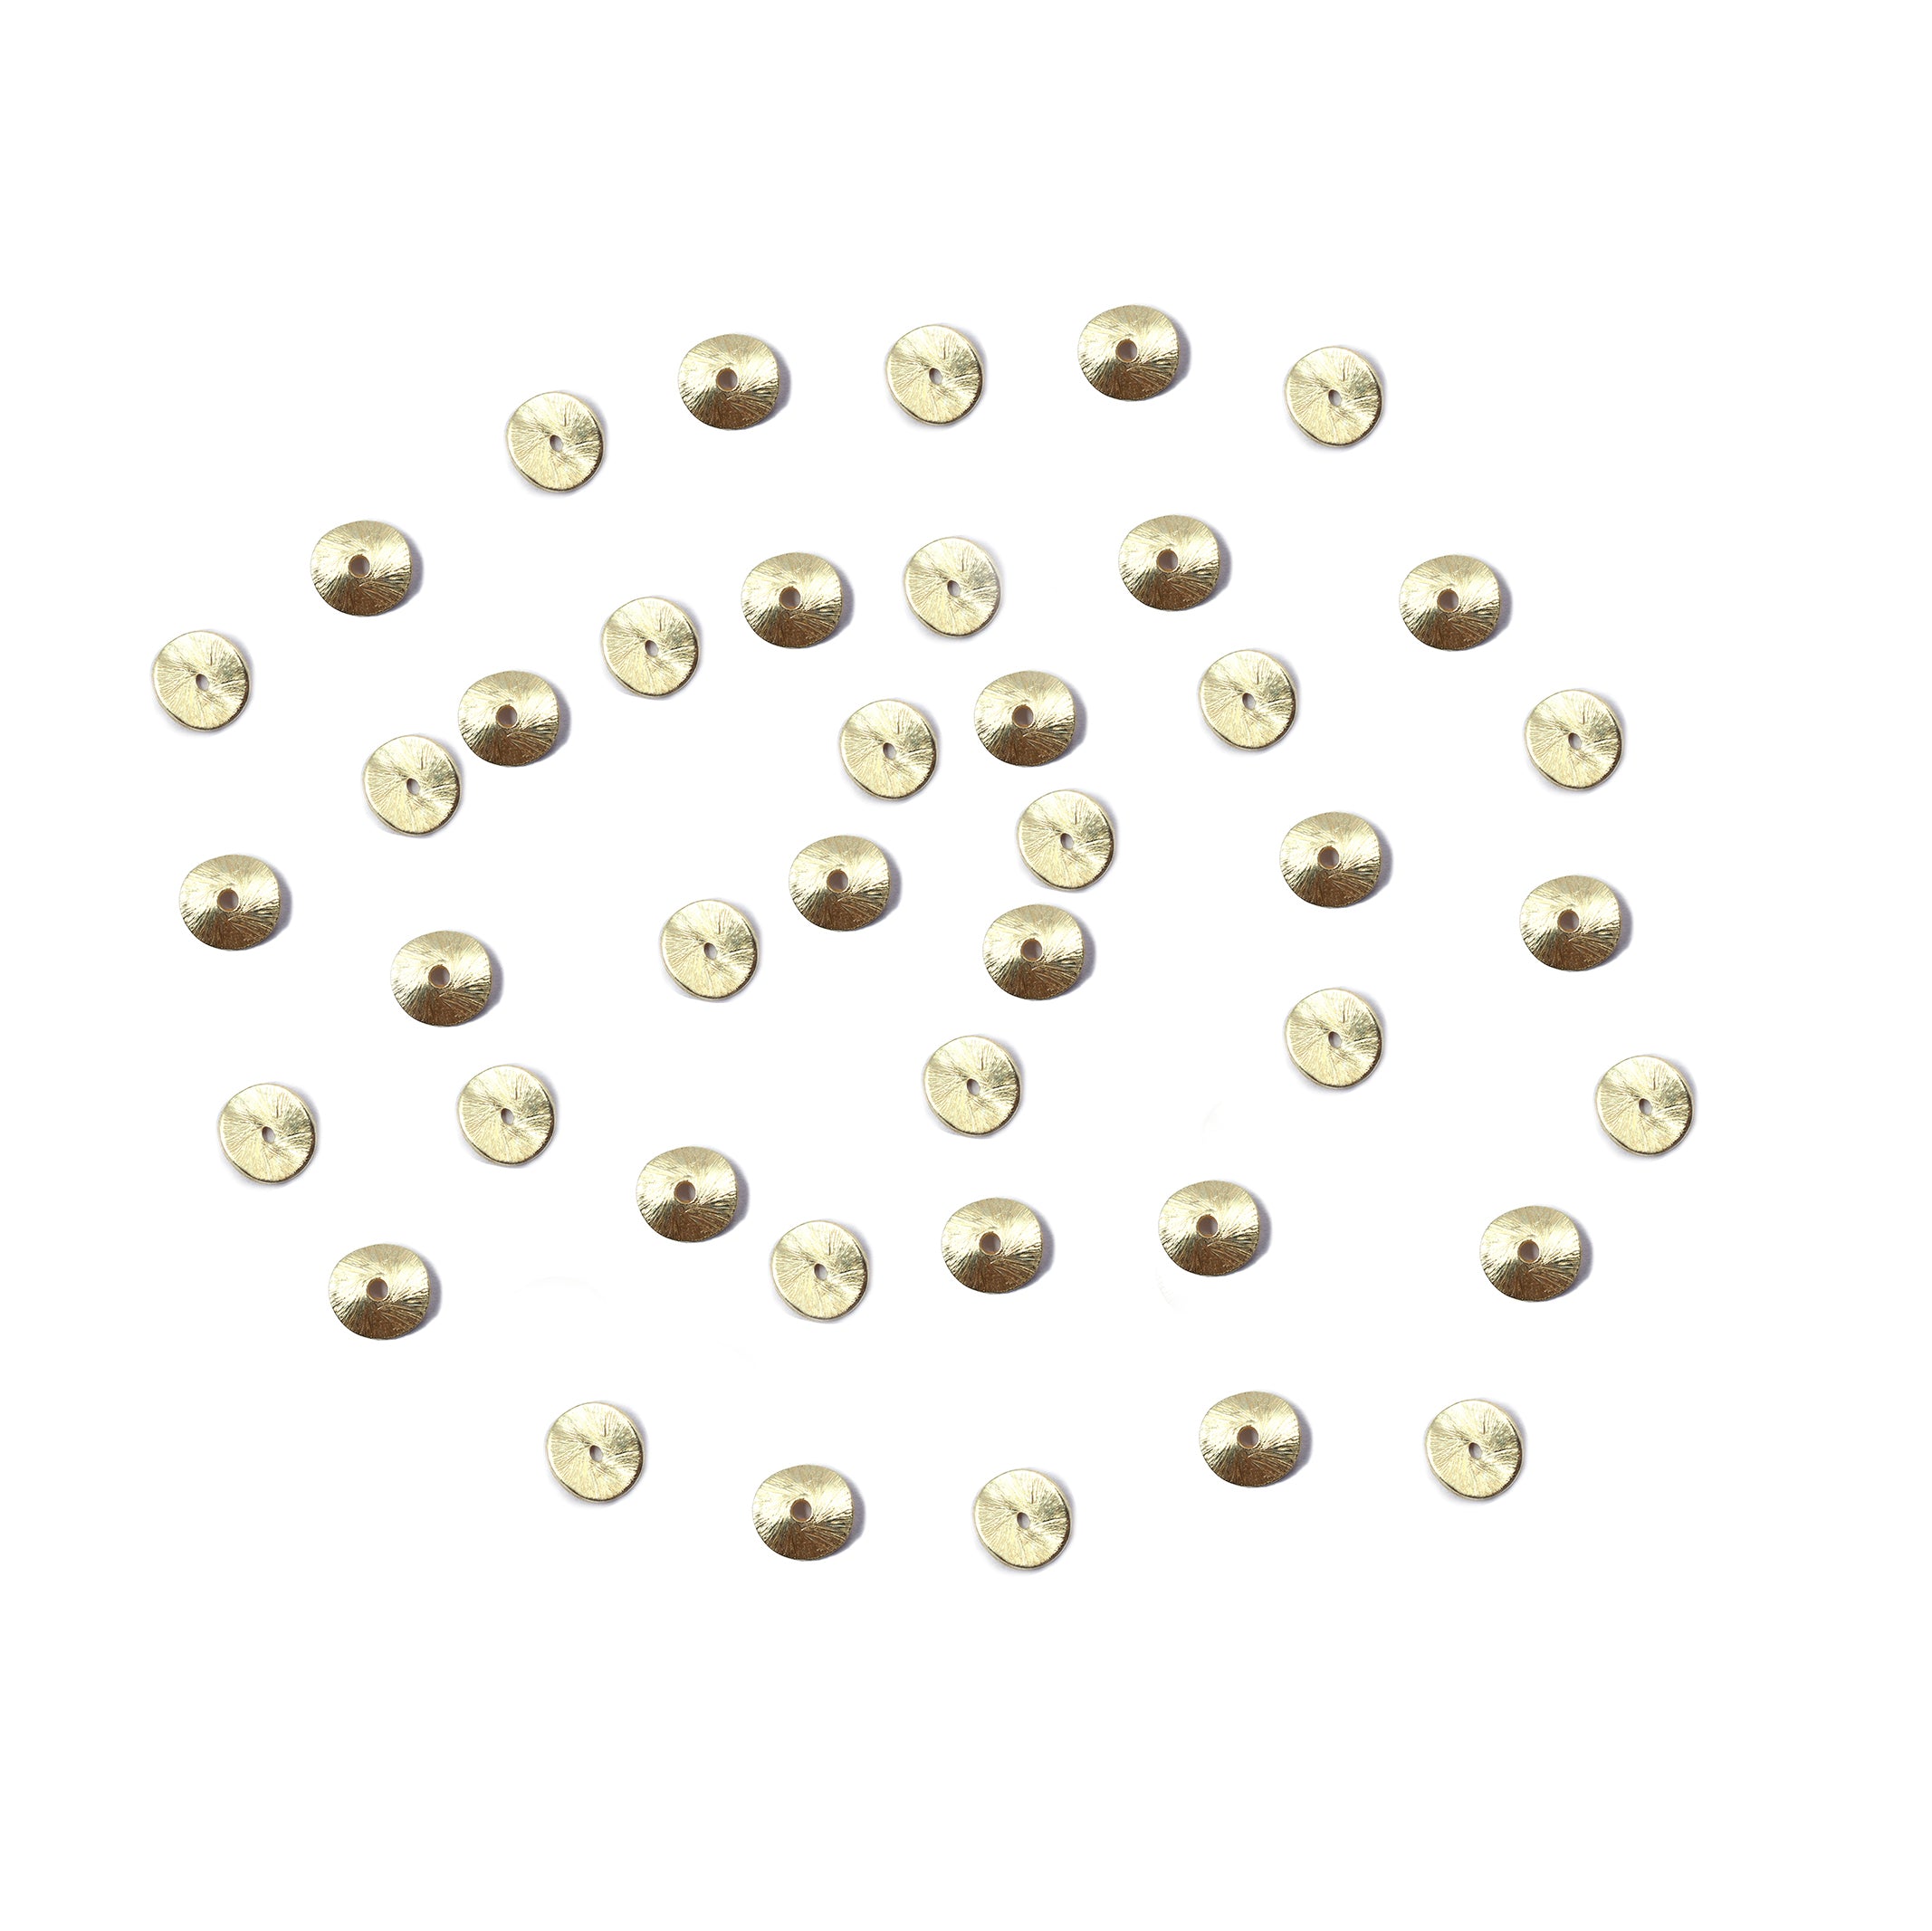 100 Pcs 6mm Wavy Disc Brushed Matte Finish Beads Gold Plated Copper